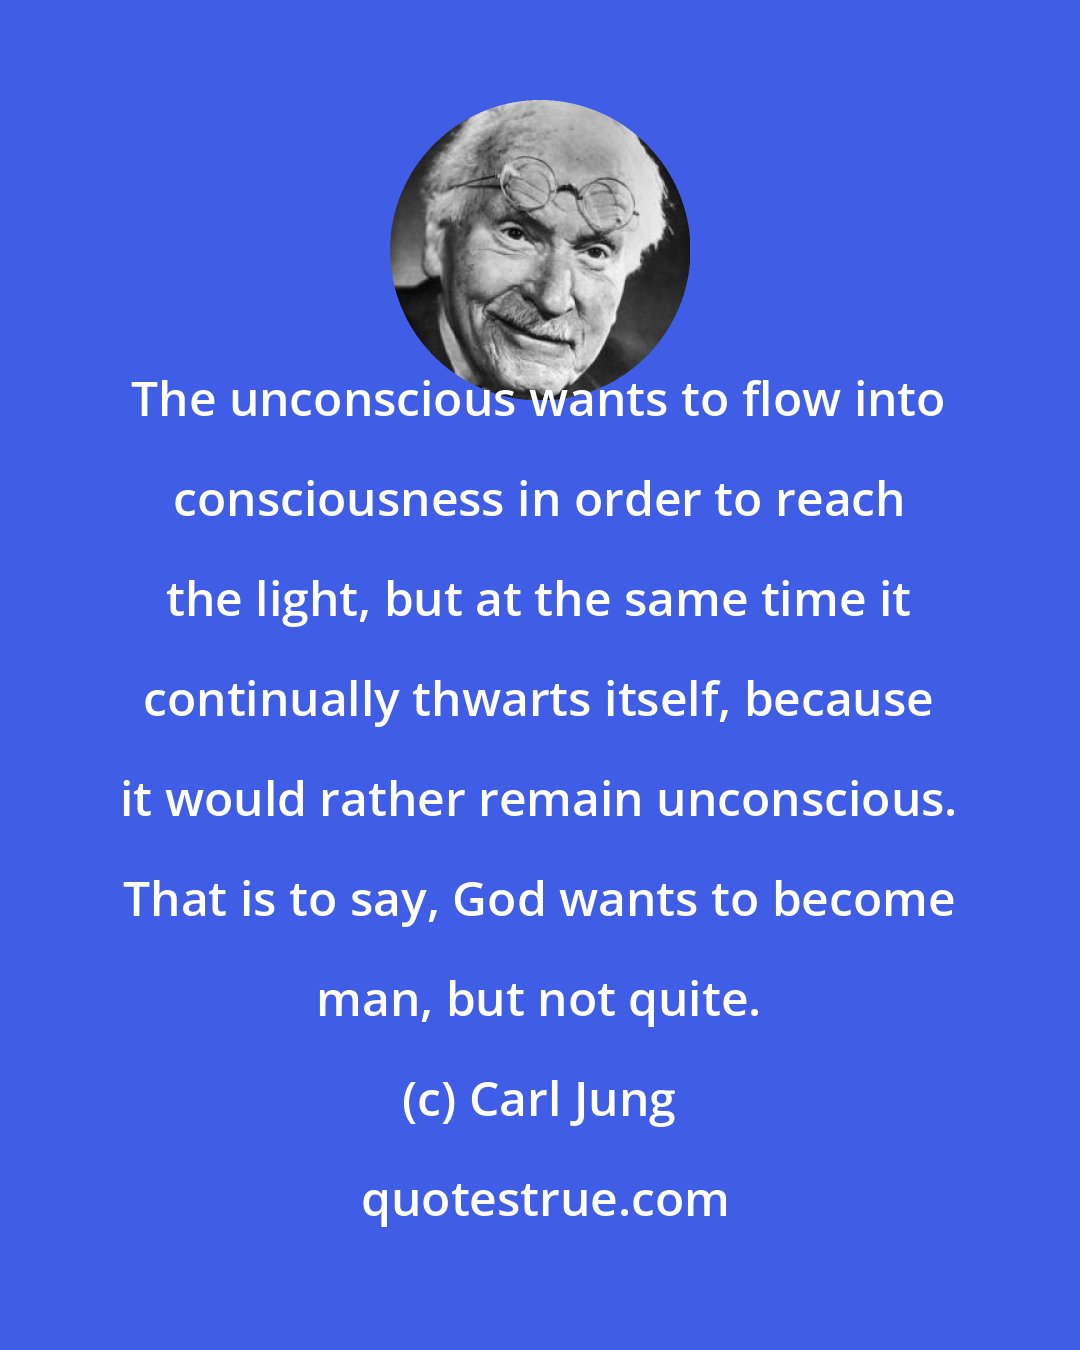 Carl Jung: The unconscious wants to flow into consciousness in order to reach the light, but at the same time it continually thwarts itself, because it would rather remain unconscious. That is to say, God wants to become man, but not quite.